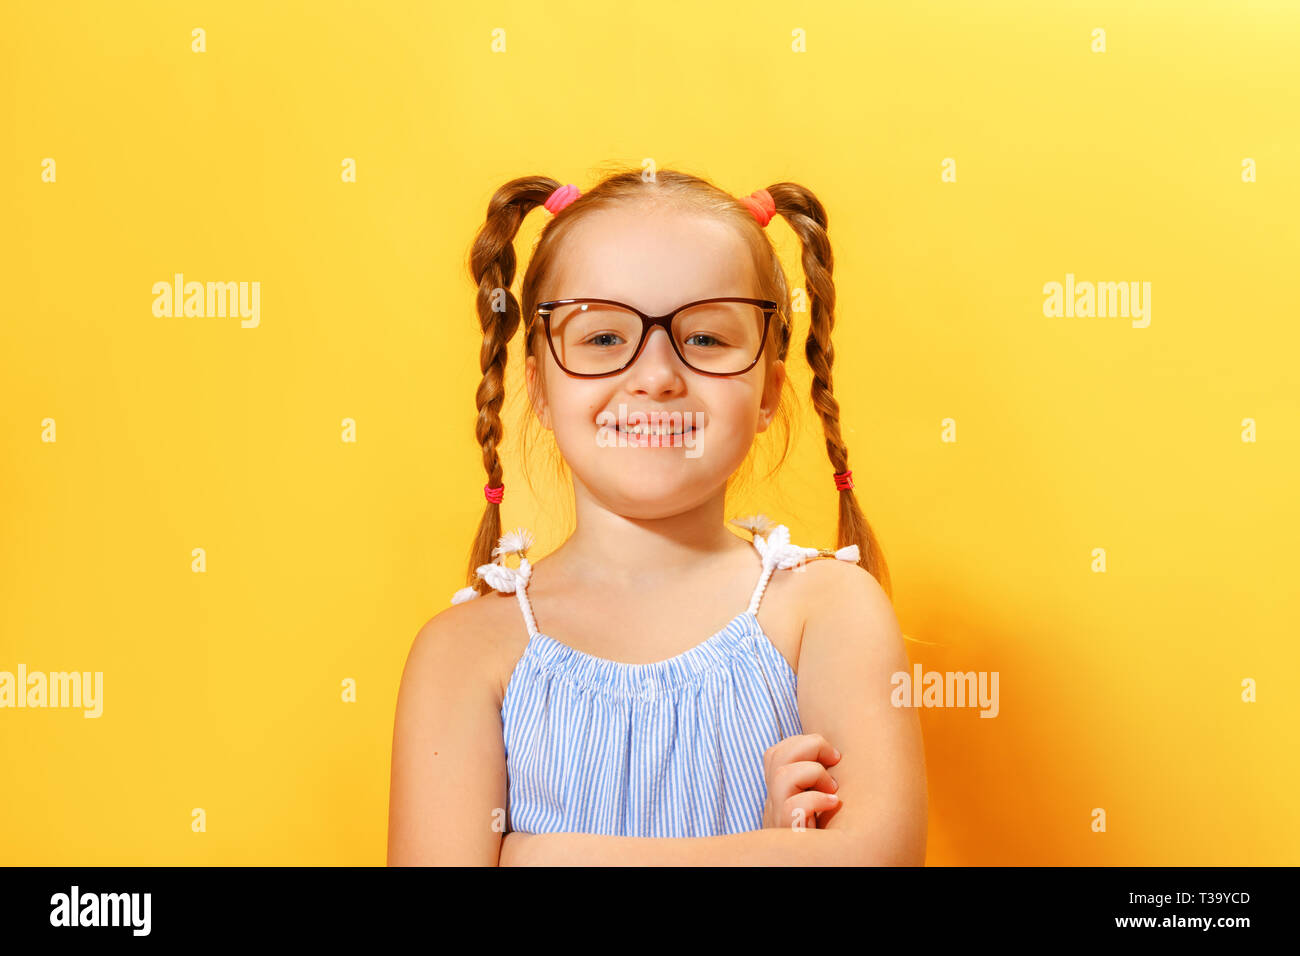 Portrait of a funny little girl of preschool child with glasses on a yellow background. Stock Photo